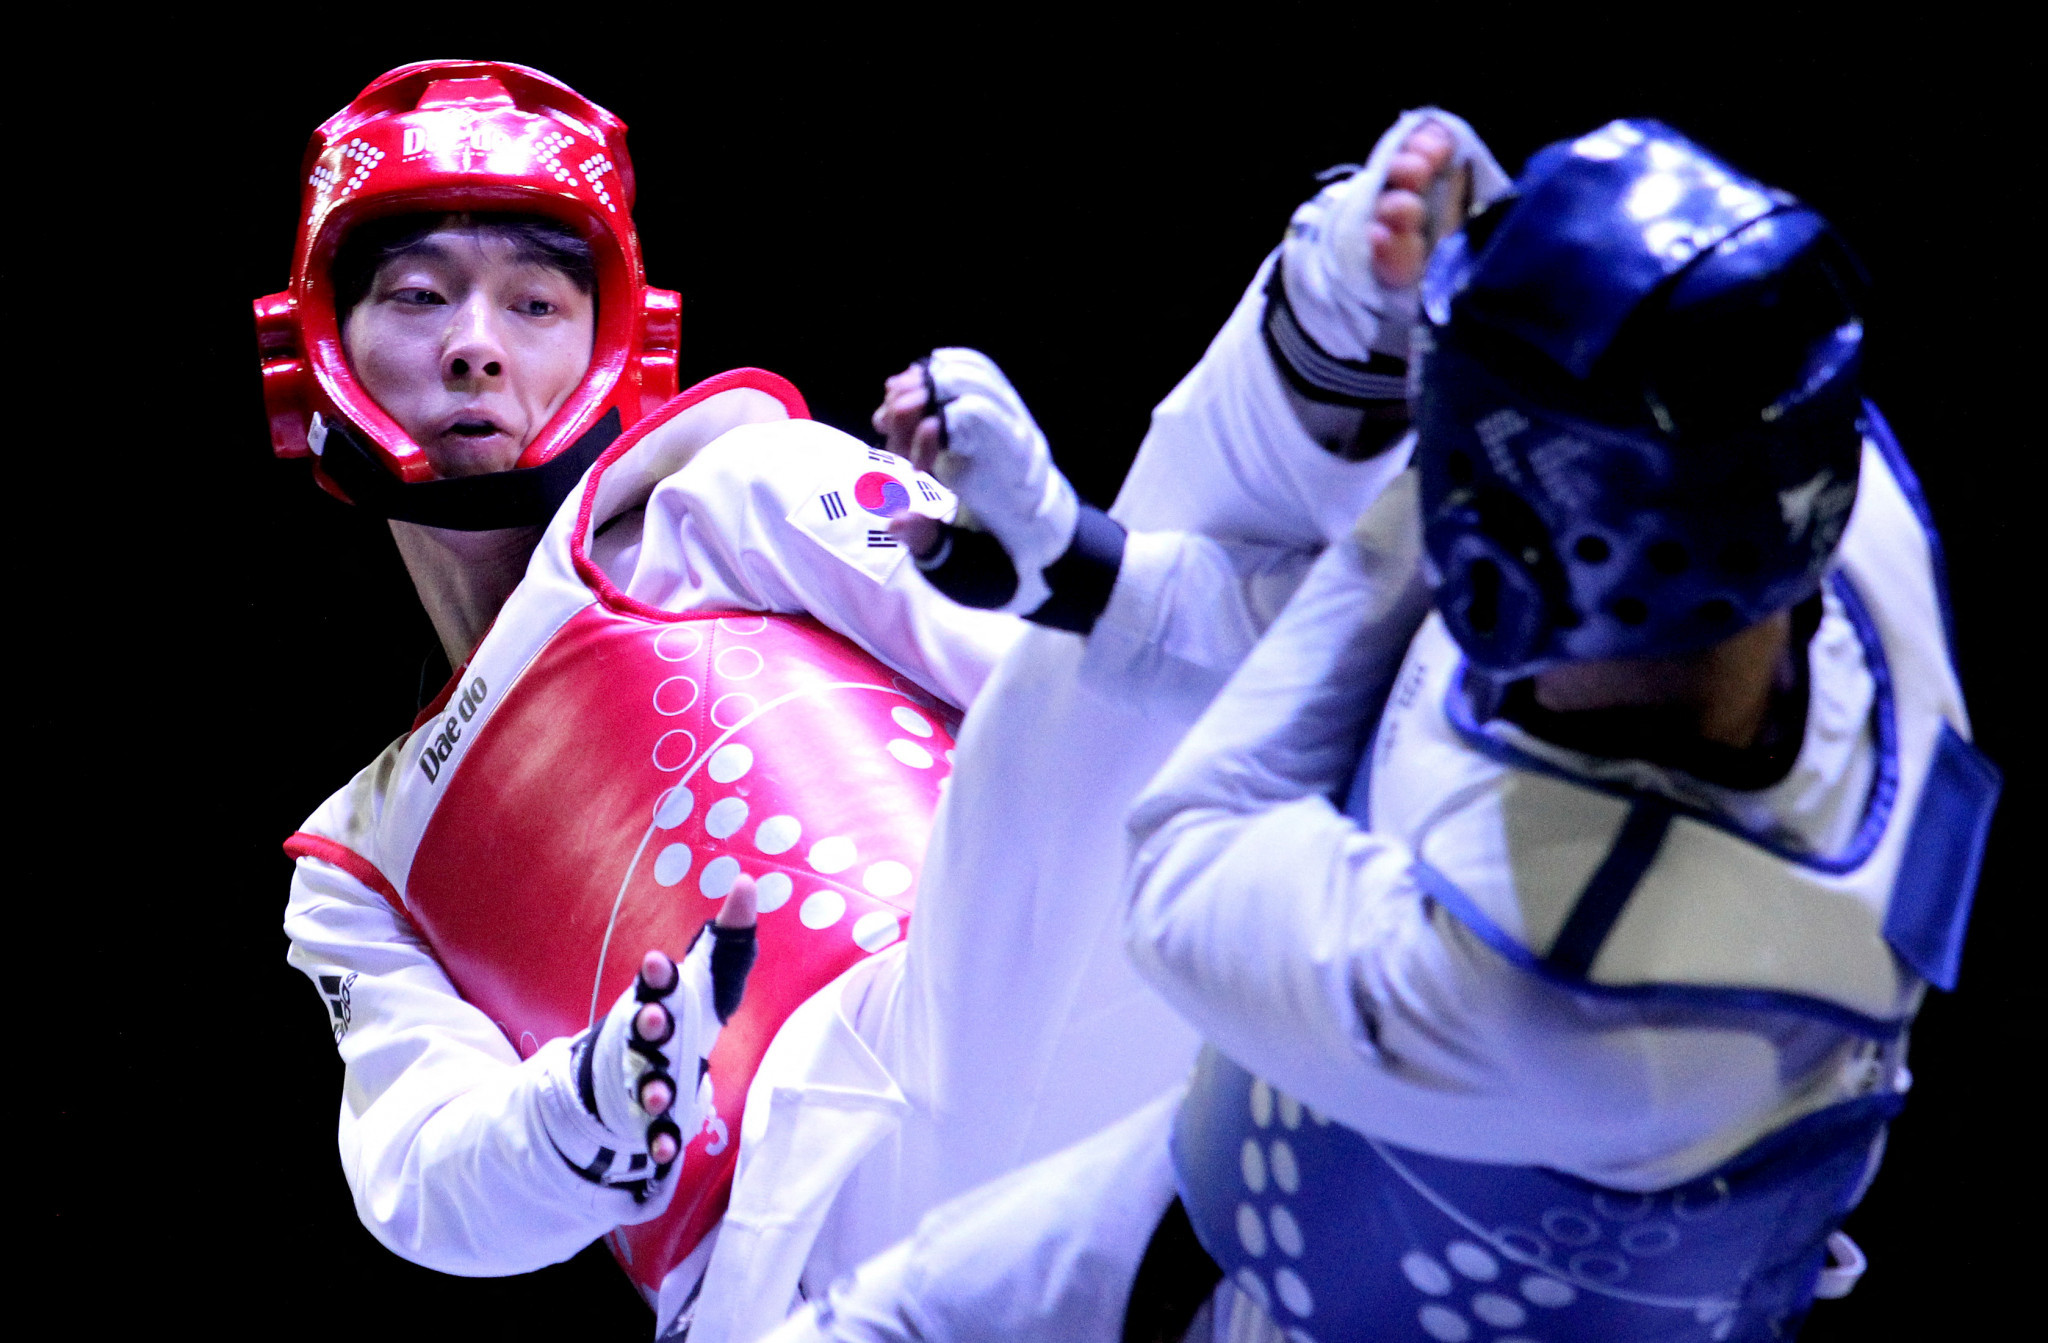 South Korea emphasises being intellectual in sports, with taekwondo being an example they use ©Getty Images